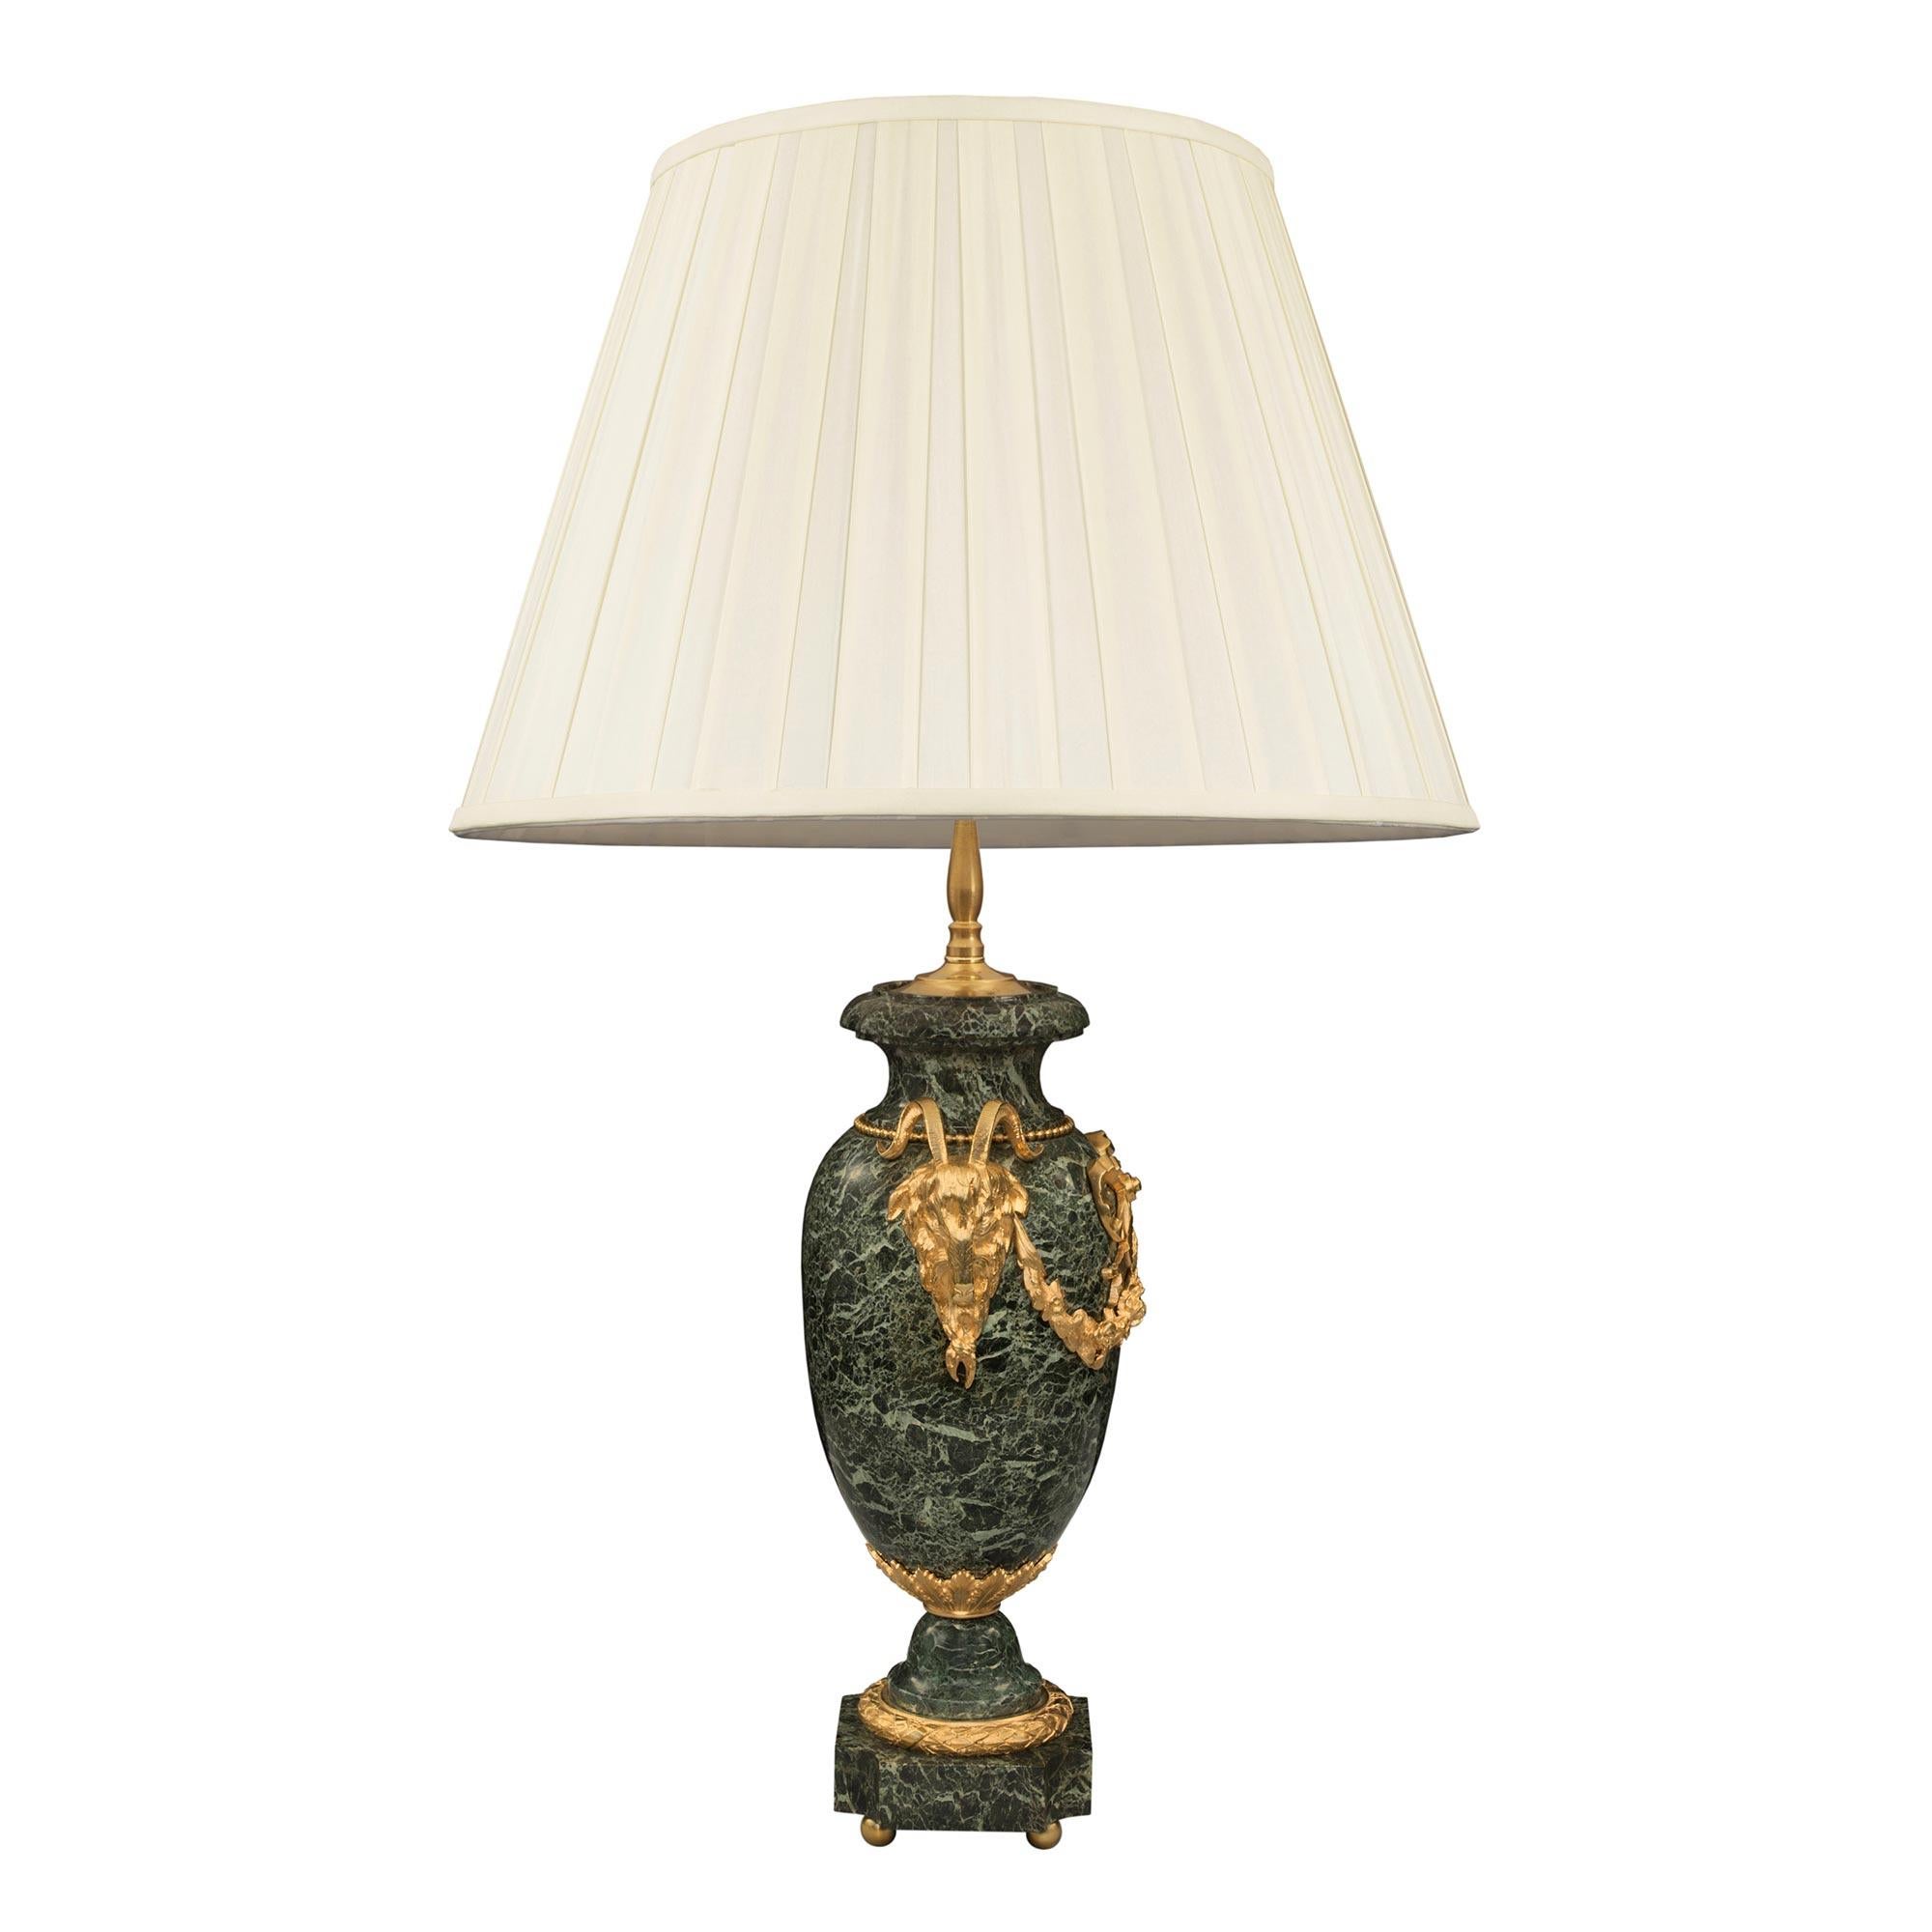 Pair of French Mid-19th Century Louis XVI Style Marble and Ormolu Lamps In Good Condition For Sale In West Palm Beach, FL